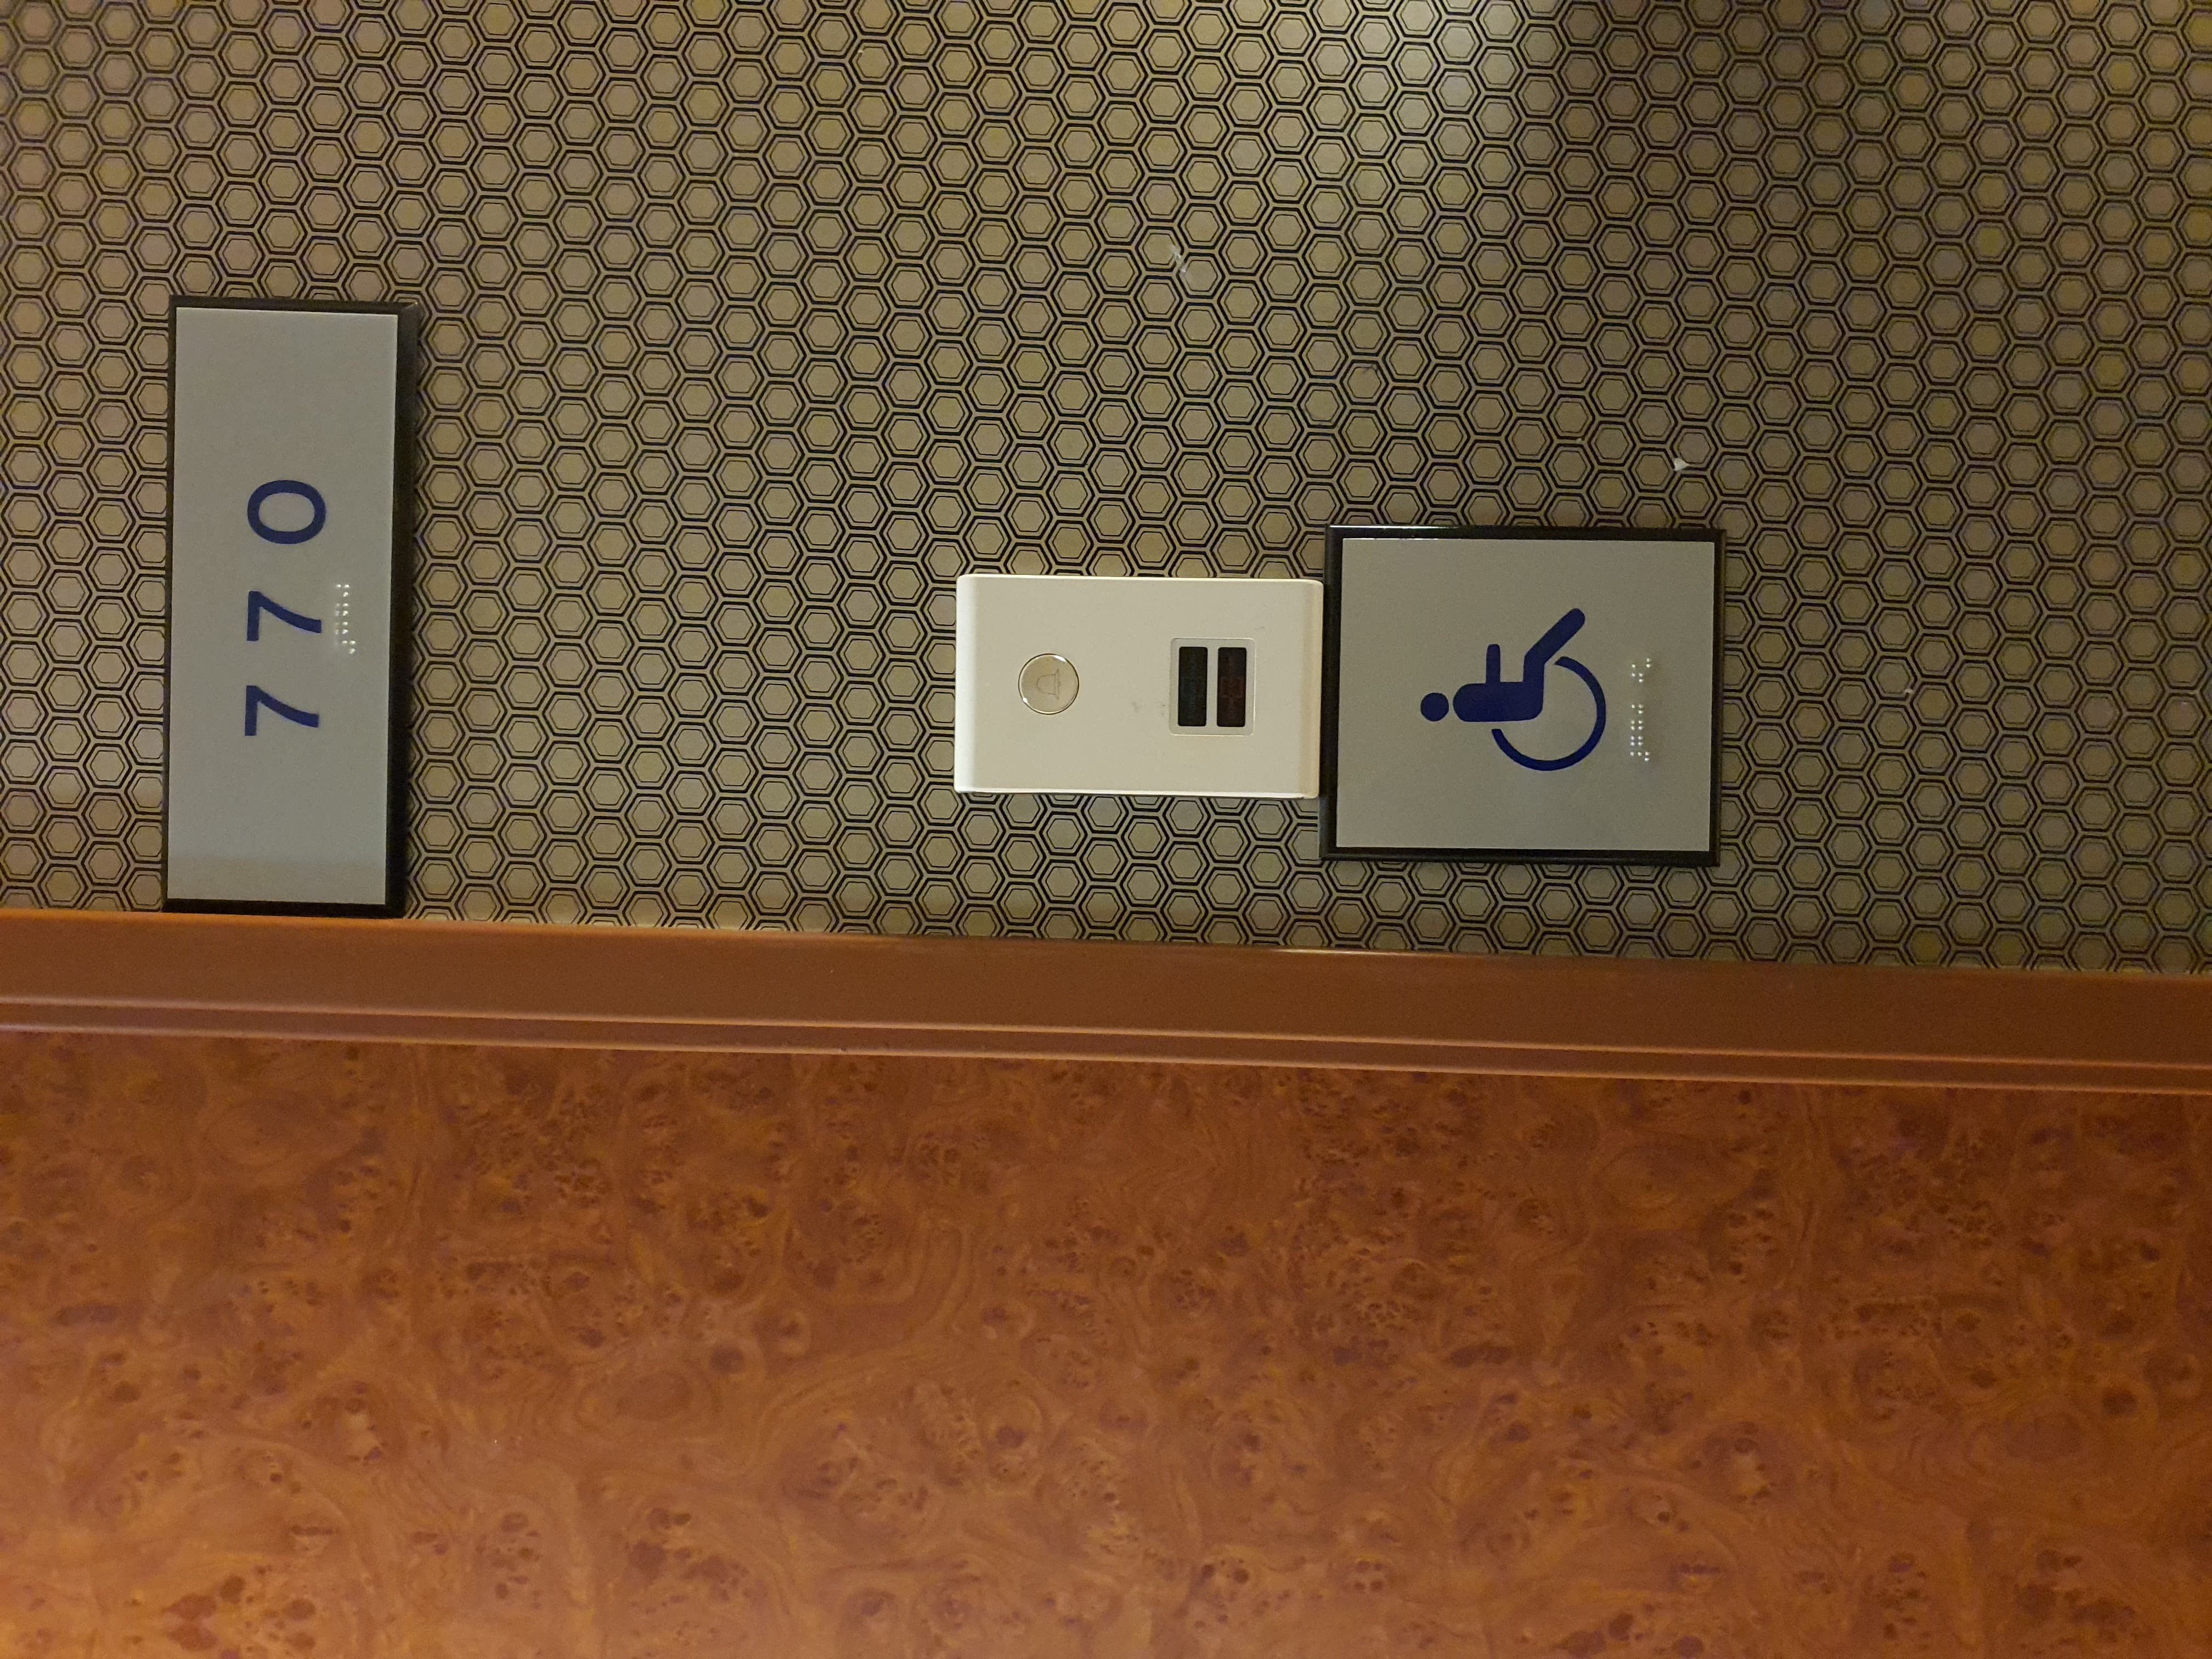 Accessible guestroom0 : The hotel room door with braille signages of the room number and the wheelchair pictogram